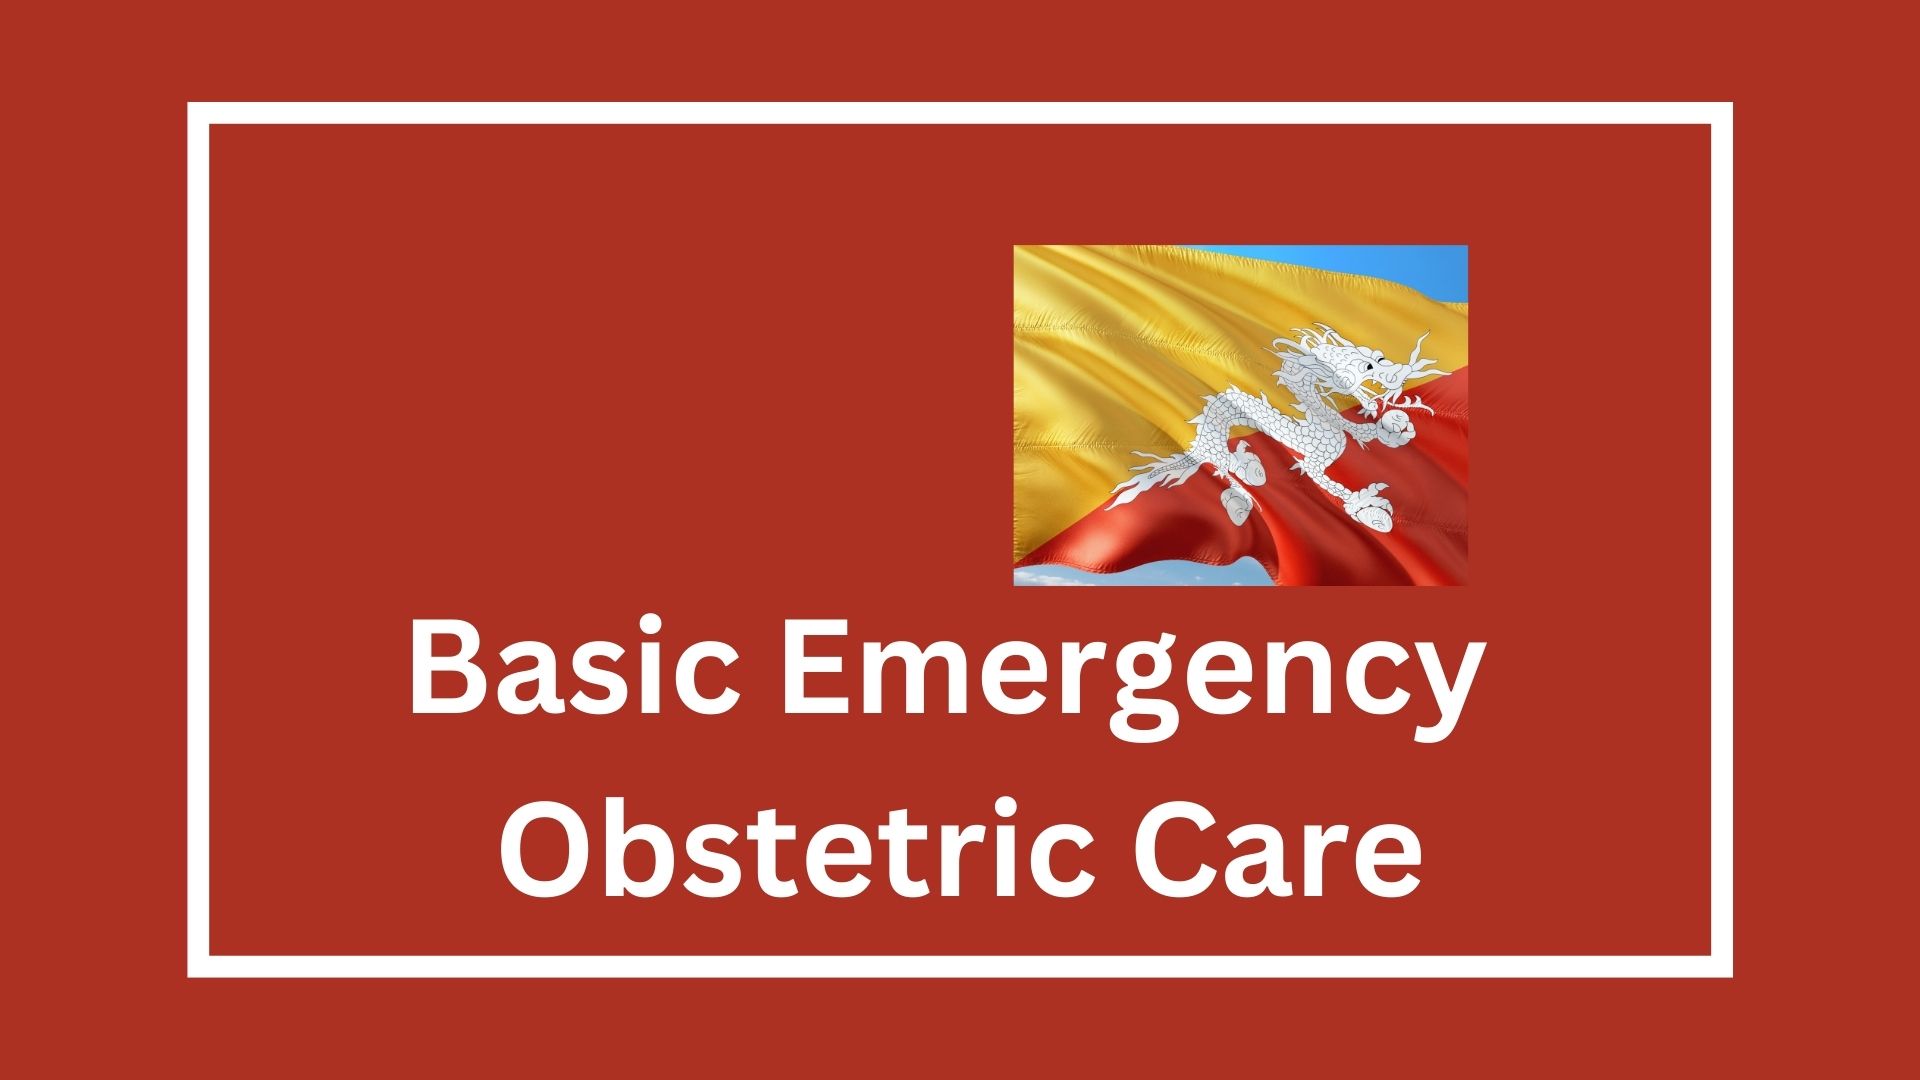 Basic Emergency Obstetric Care